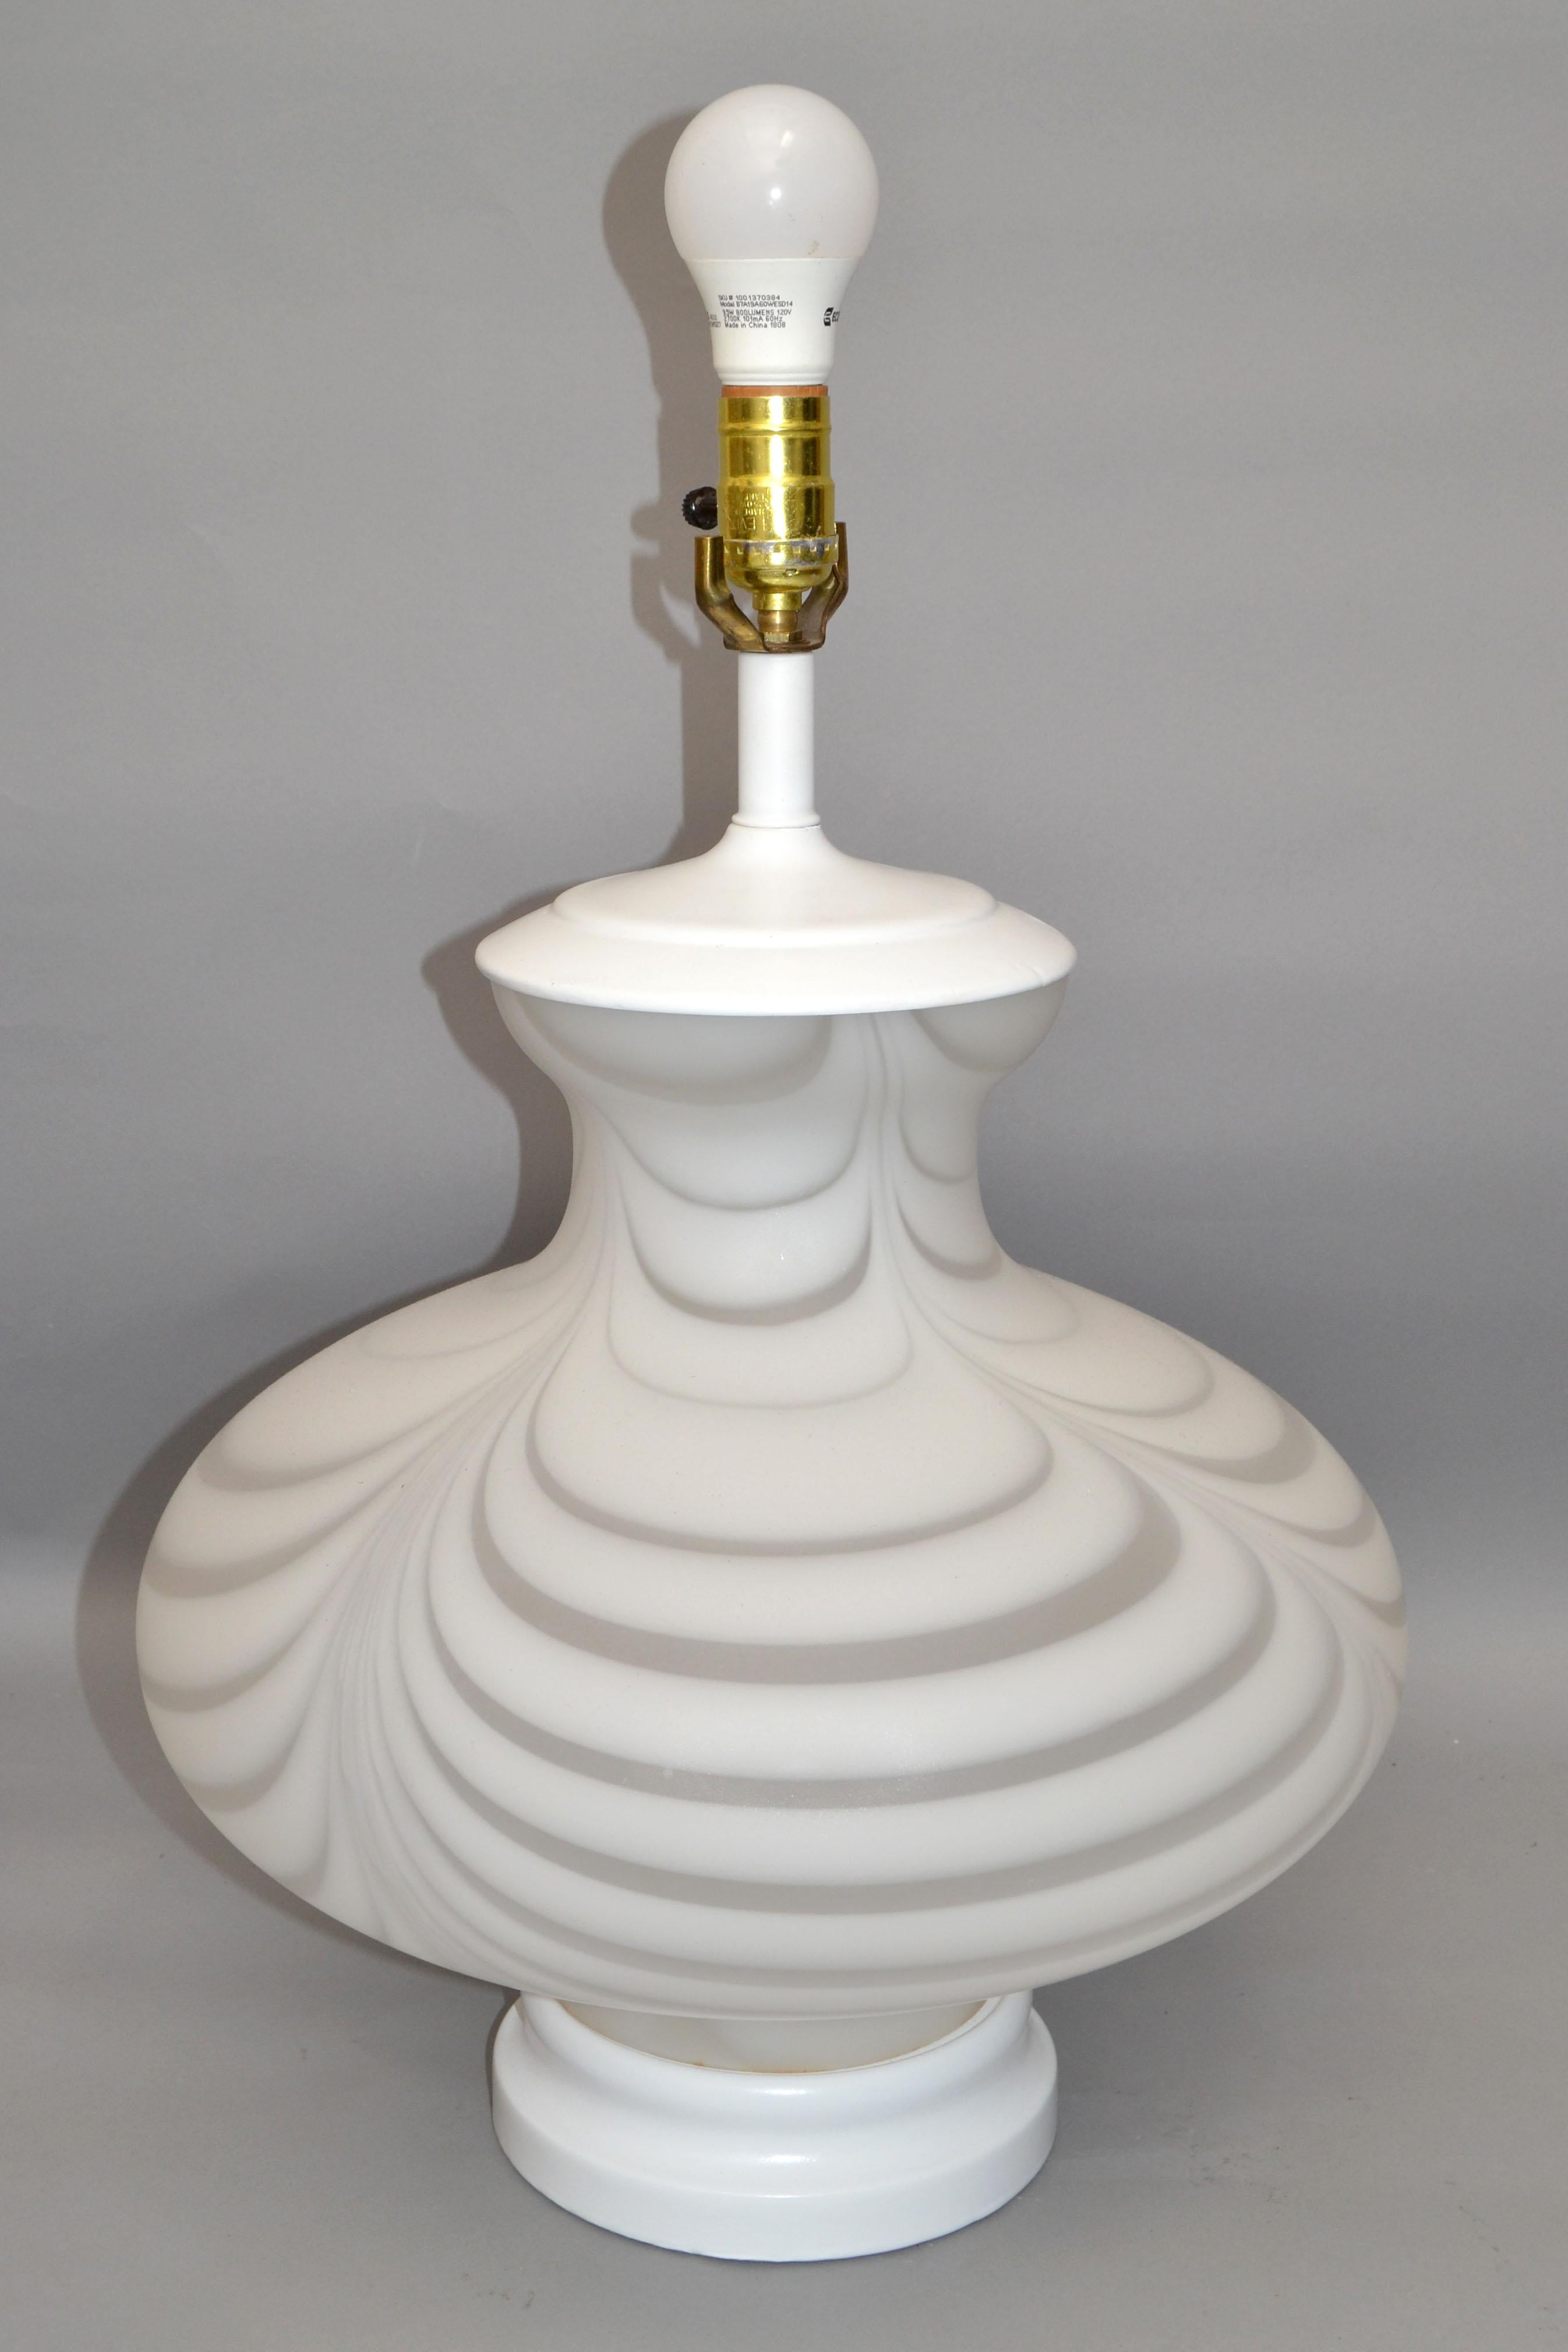 Late 20th Century Mazzega Murano Style Table Lamp Swirled Mottled White Murano Glass 1970 Italy For Sale